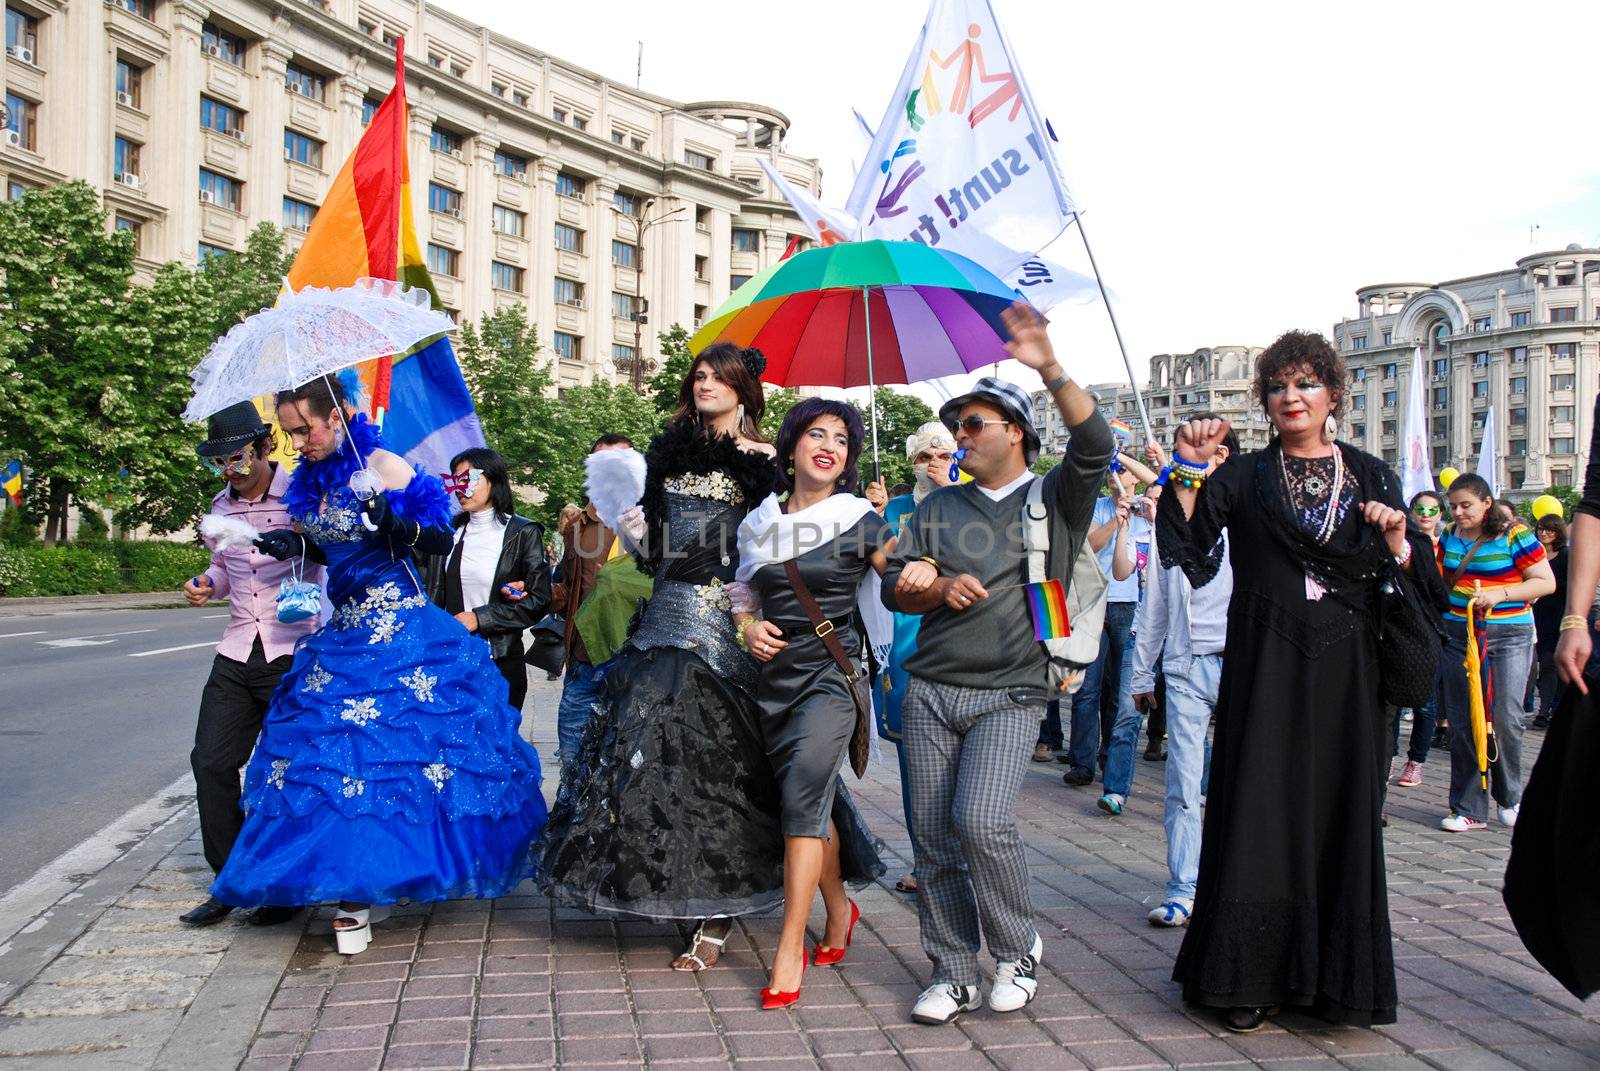 Participants parade at Gay Fest Parade May 22, 2010 in Bucharest, Romania by marimar8989